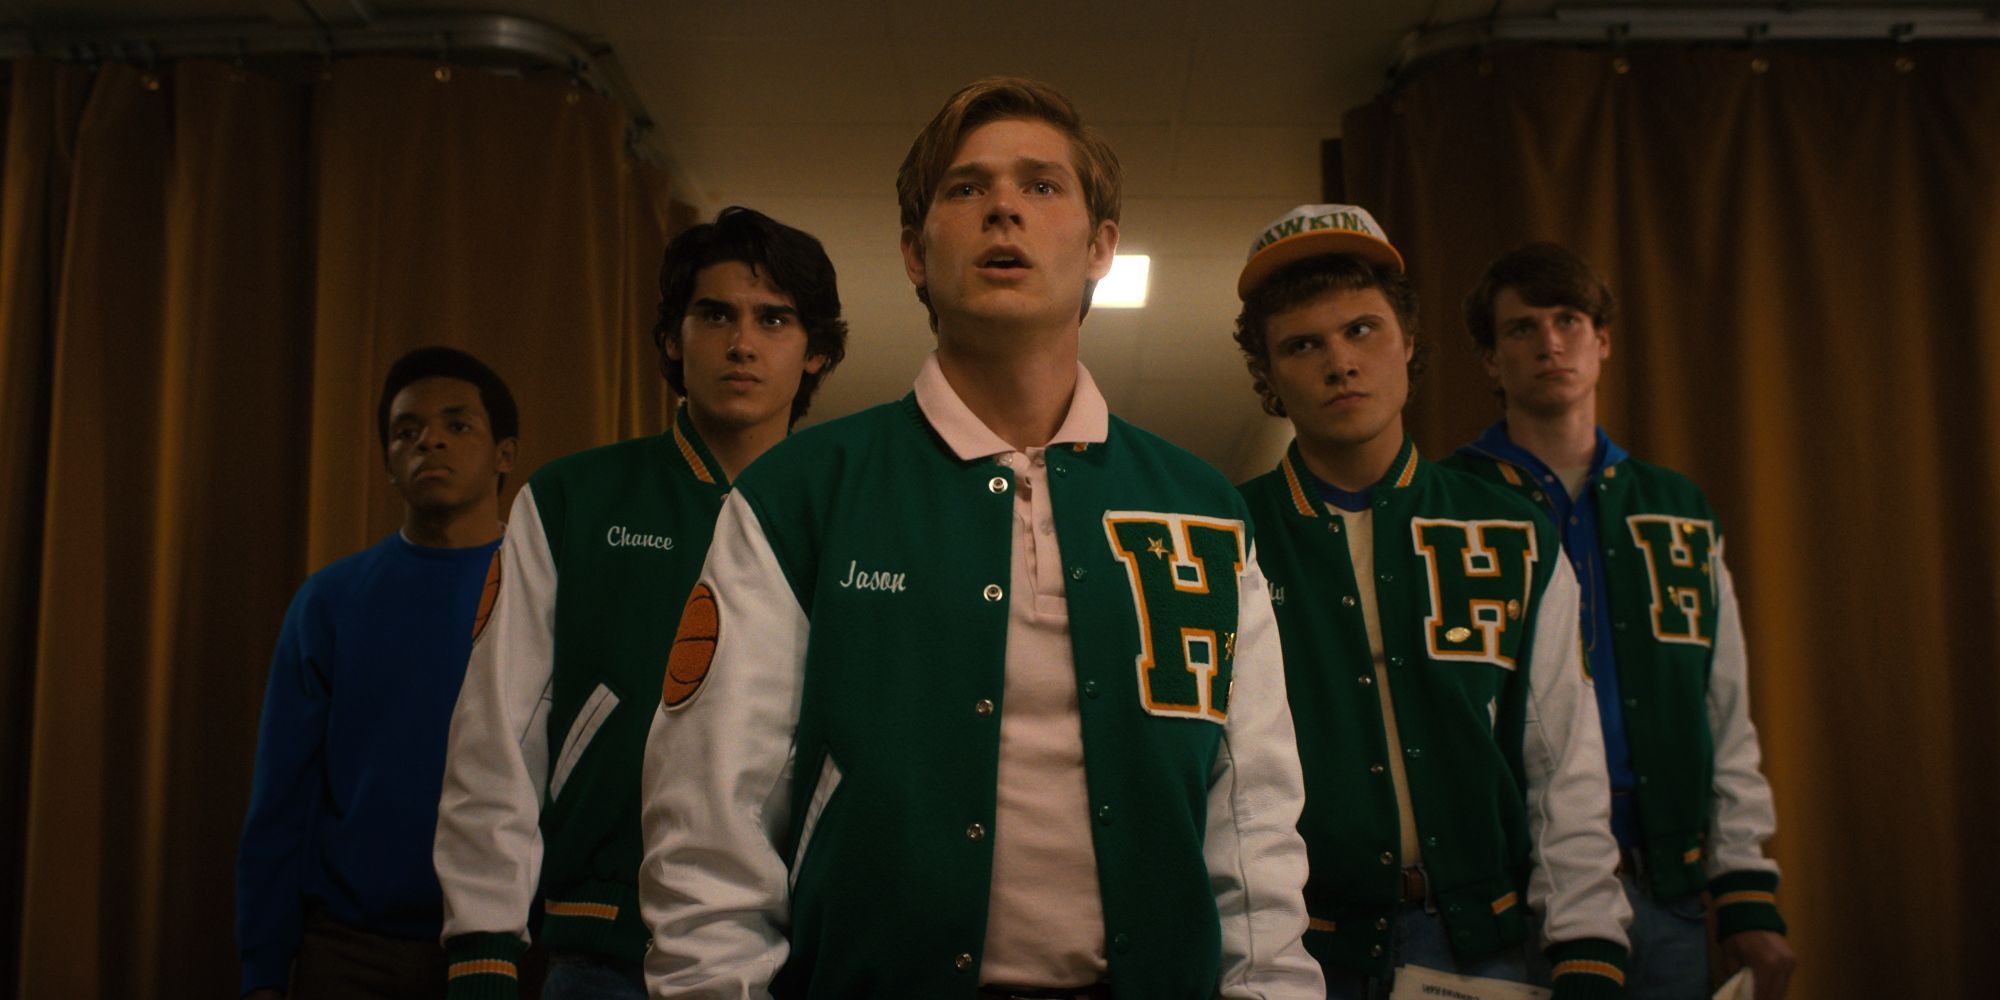 Mason Dye as Jason Carver in Stranger Things season 4 with his gang all wearing letterman jackets